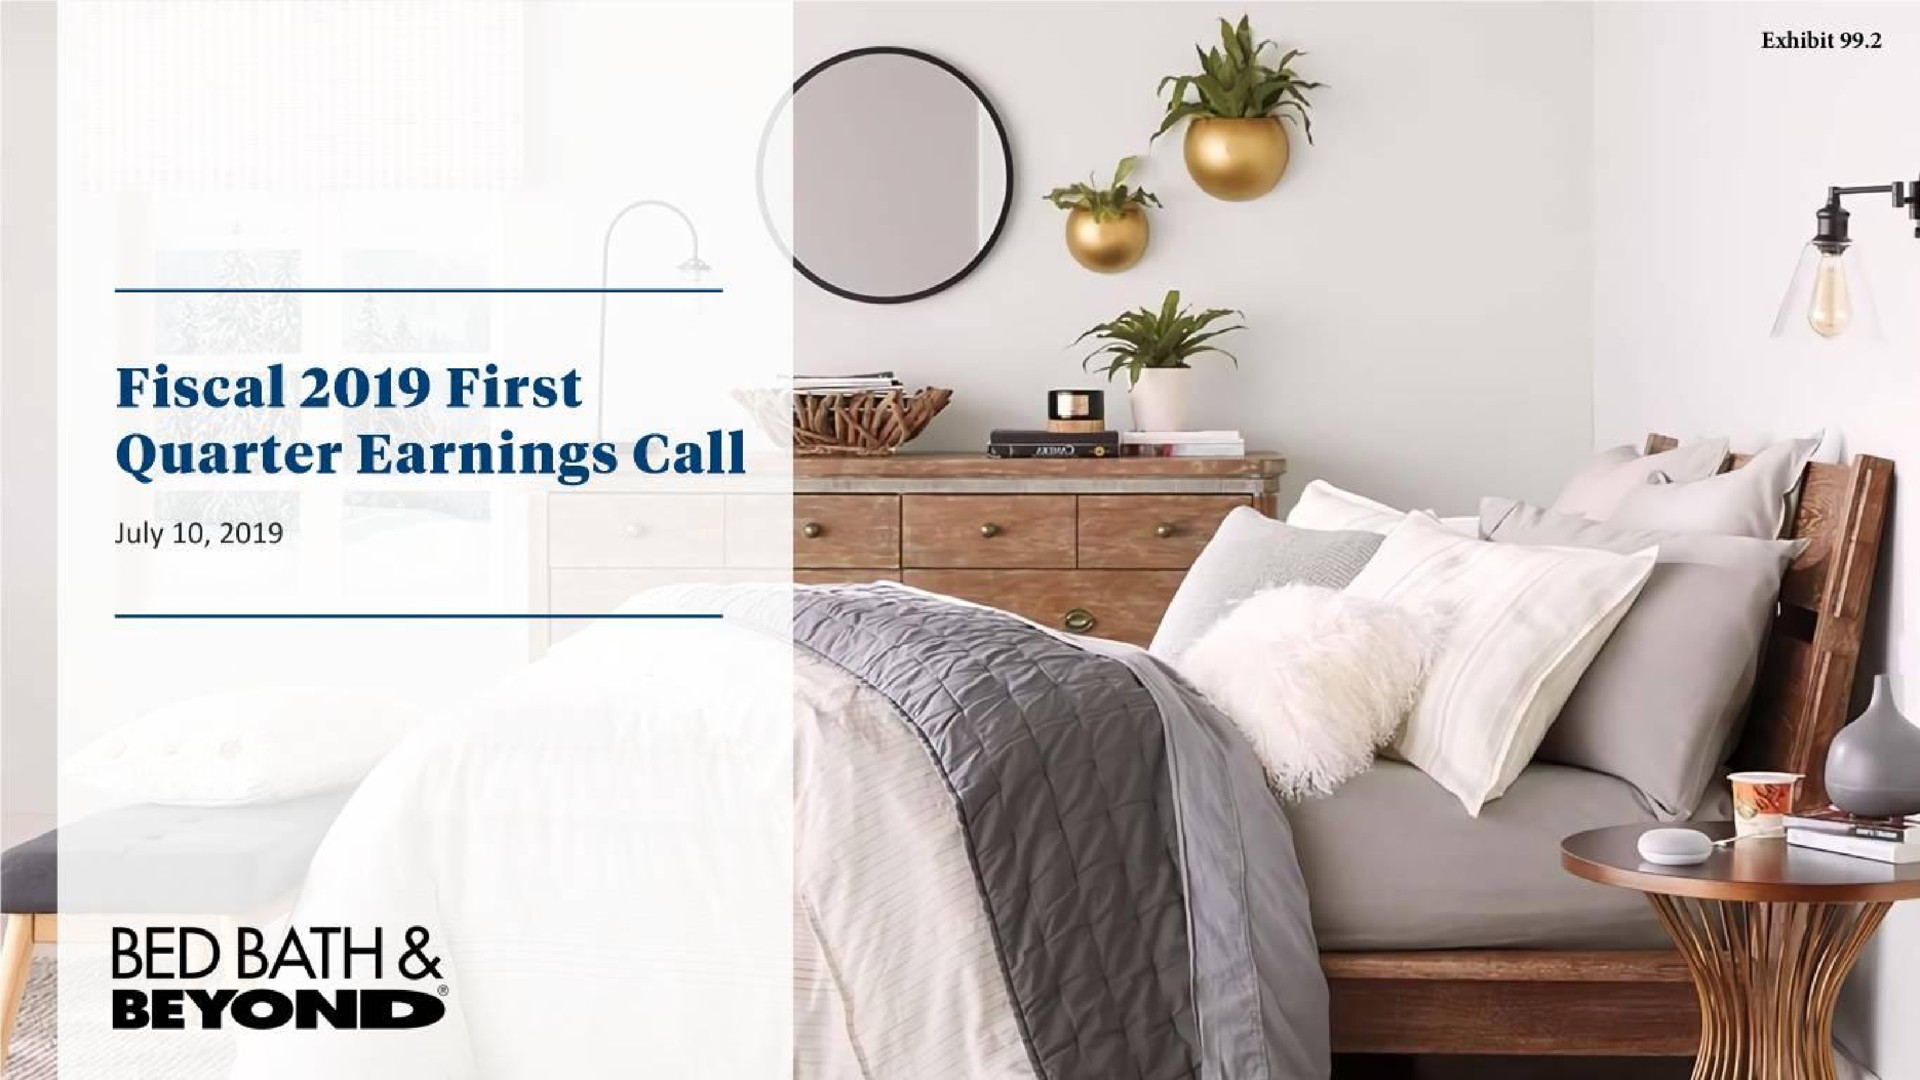 fiscal first quarter earnings call bed bath beyond | Bed Bath & Beyond